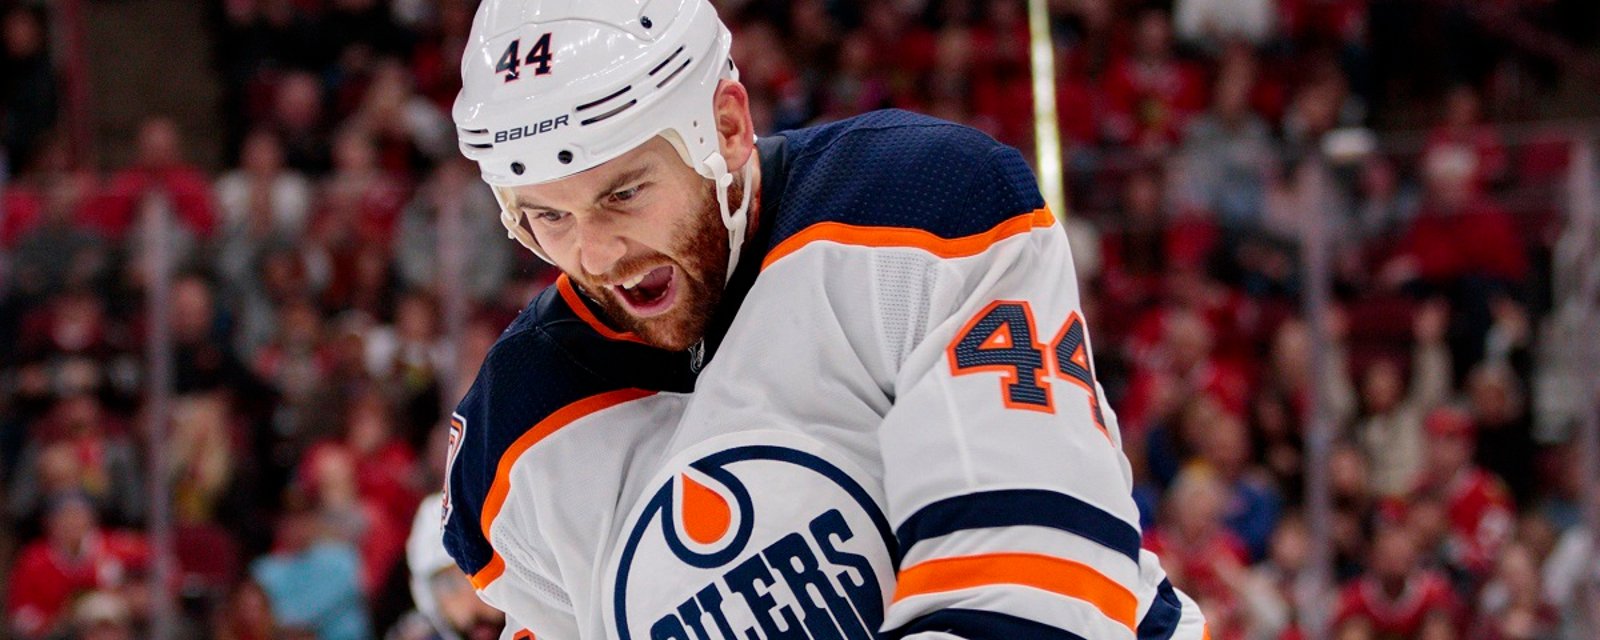 Rumor: Zack Kassian headed for a big, multi-year, contract extension from the Oilers.